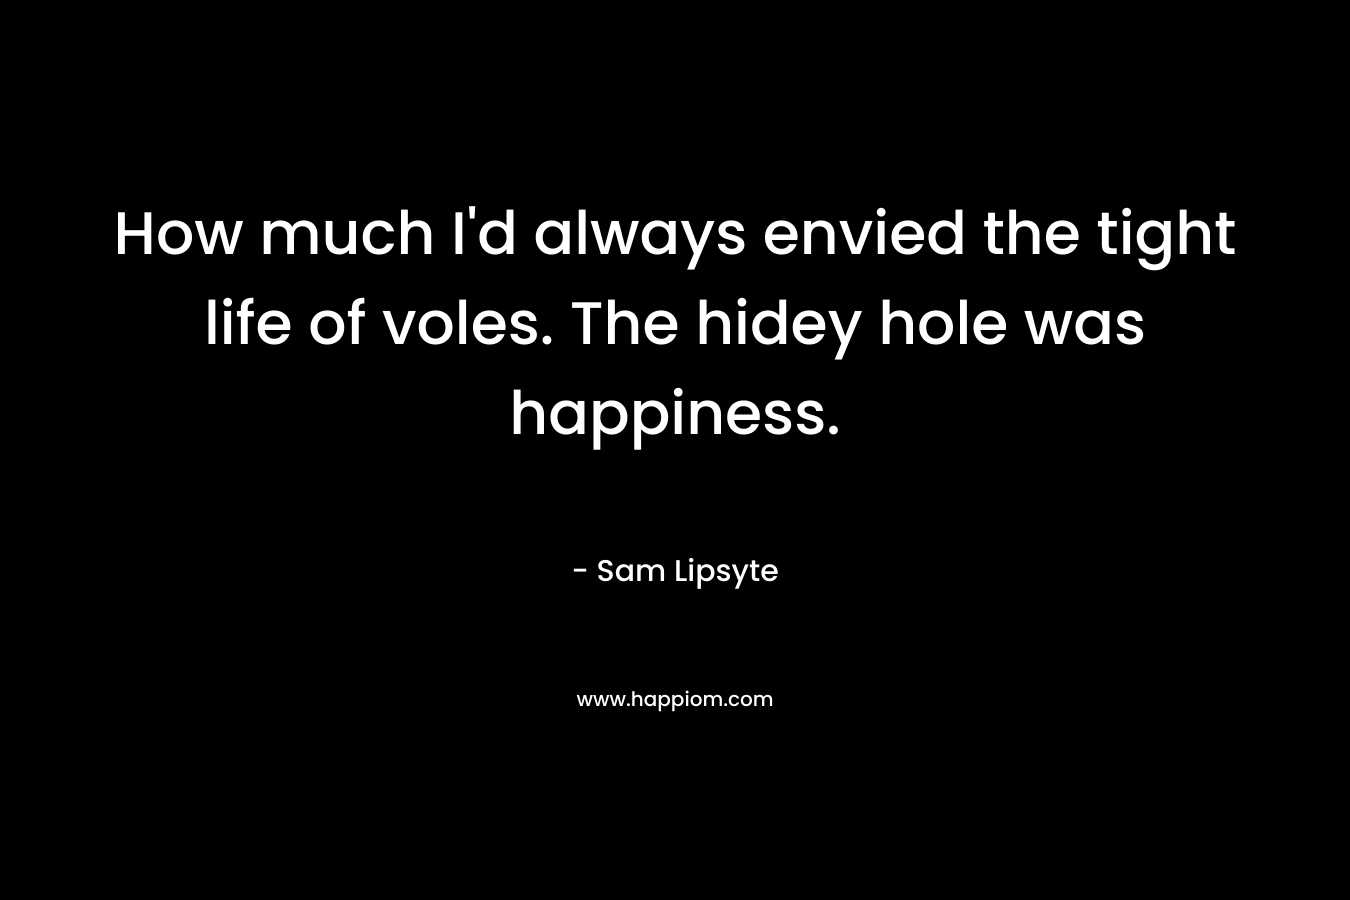 How much I'd always envied the tight life of voles. The hidey hole was happiness.